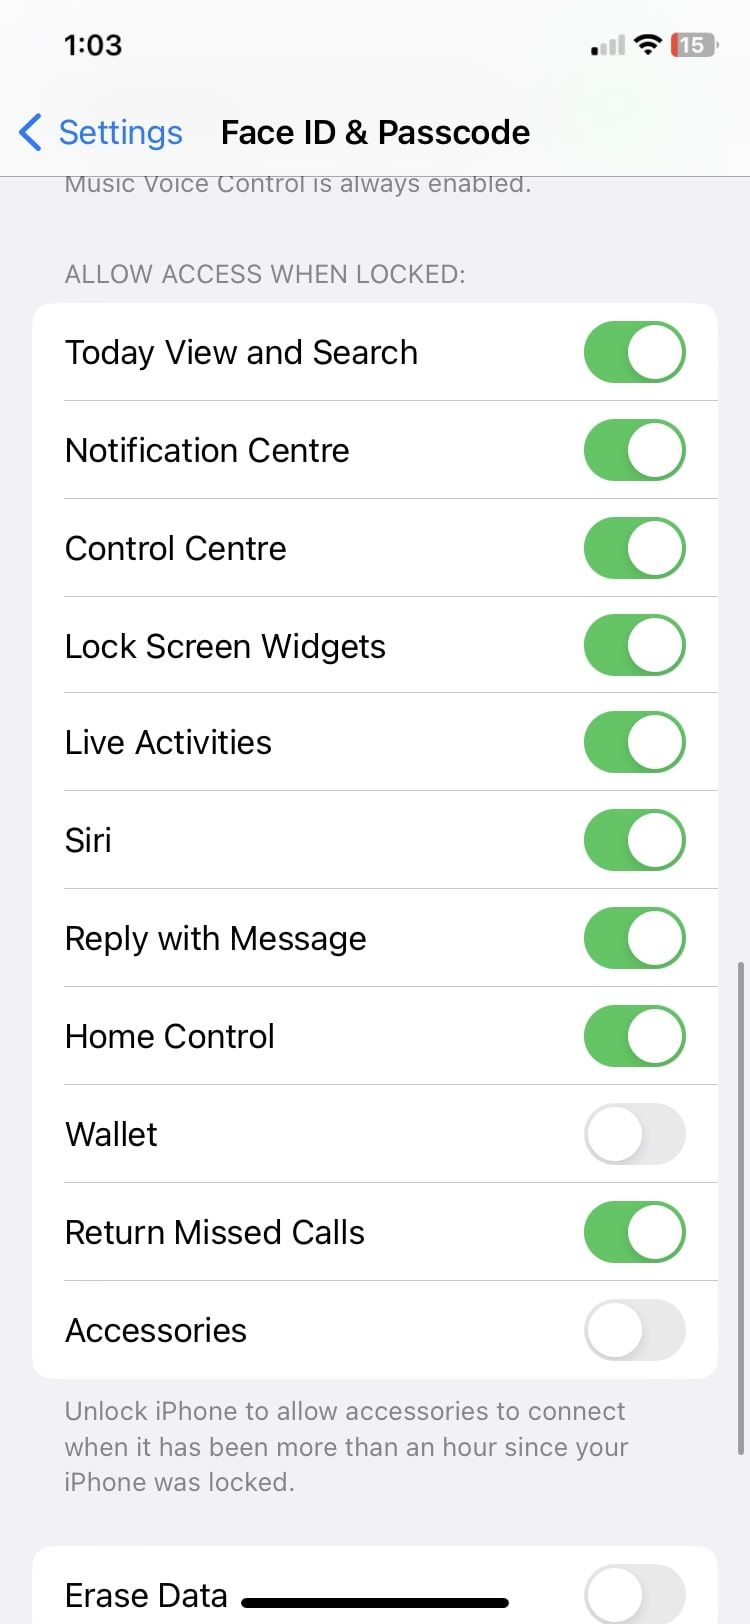 live activities toggle